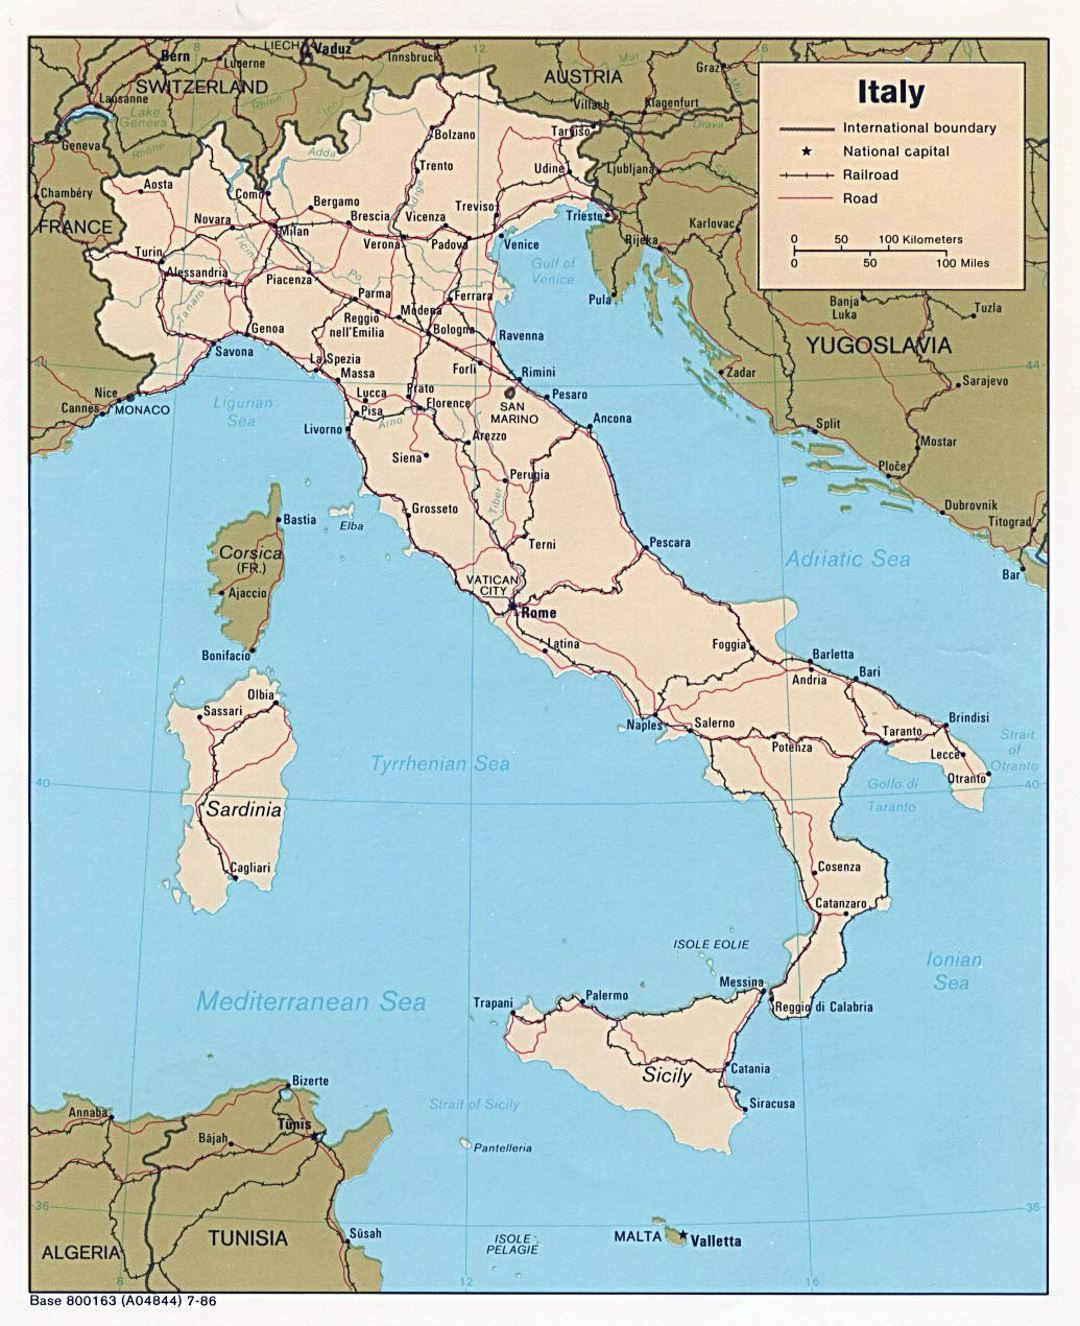 Large political map of Italy with roads, railroads and major cities - 1986